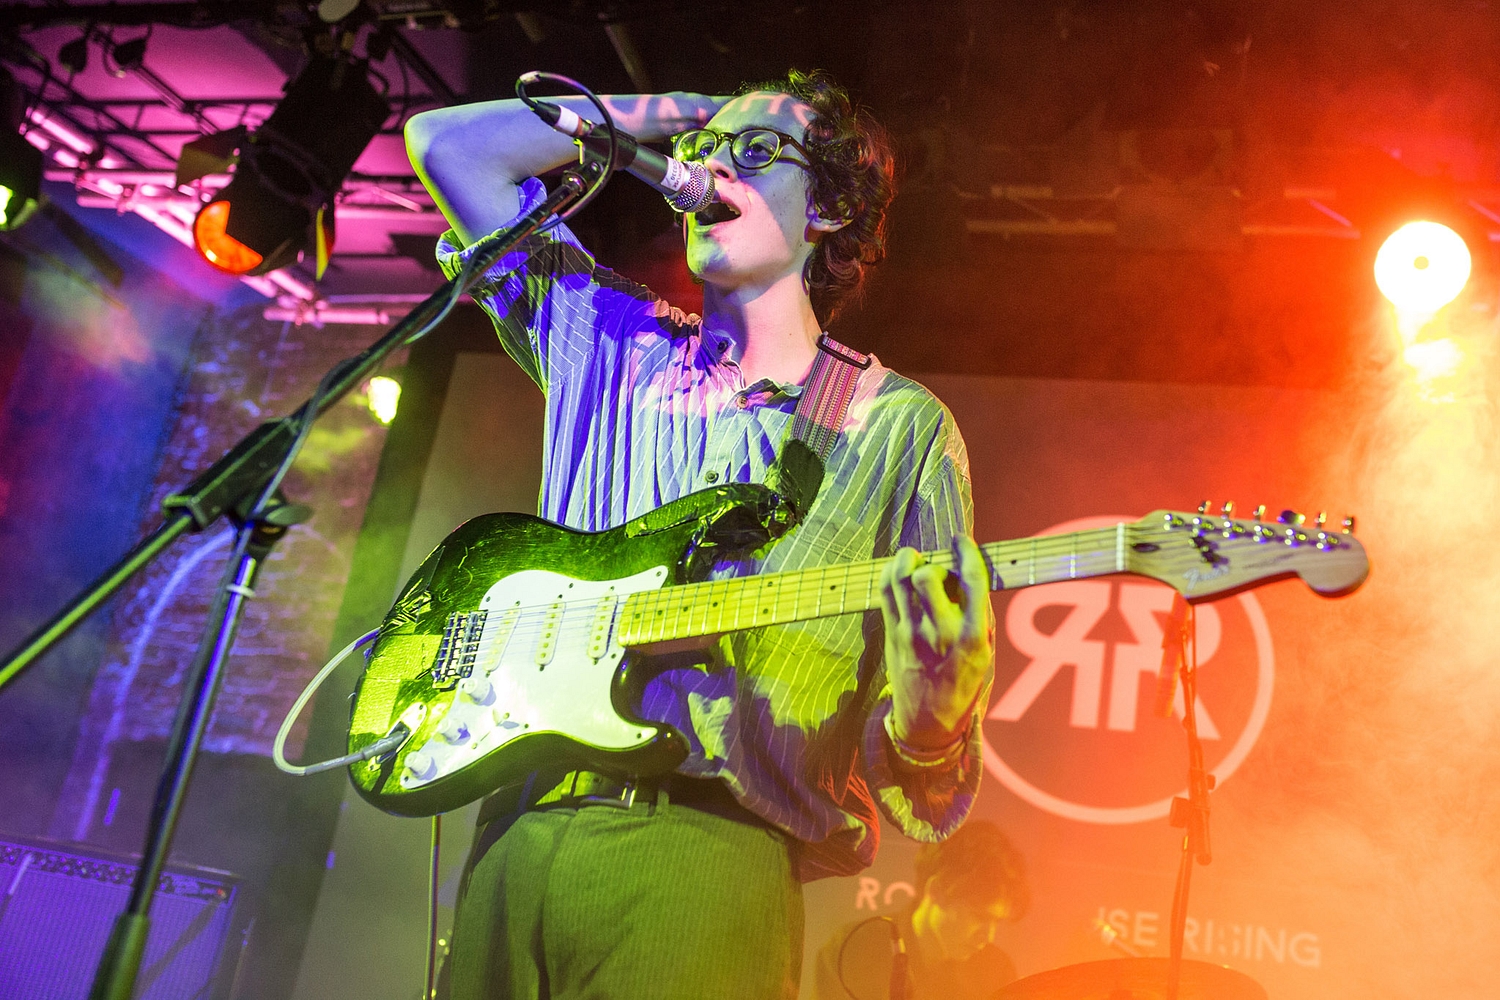 From Rat Boy to Låpsley - Ten acts to see at The Great Escape 2015